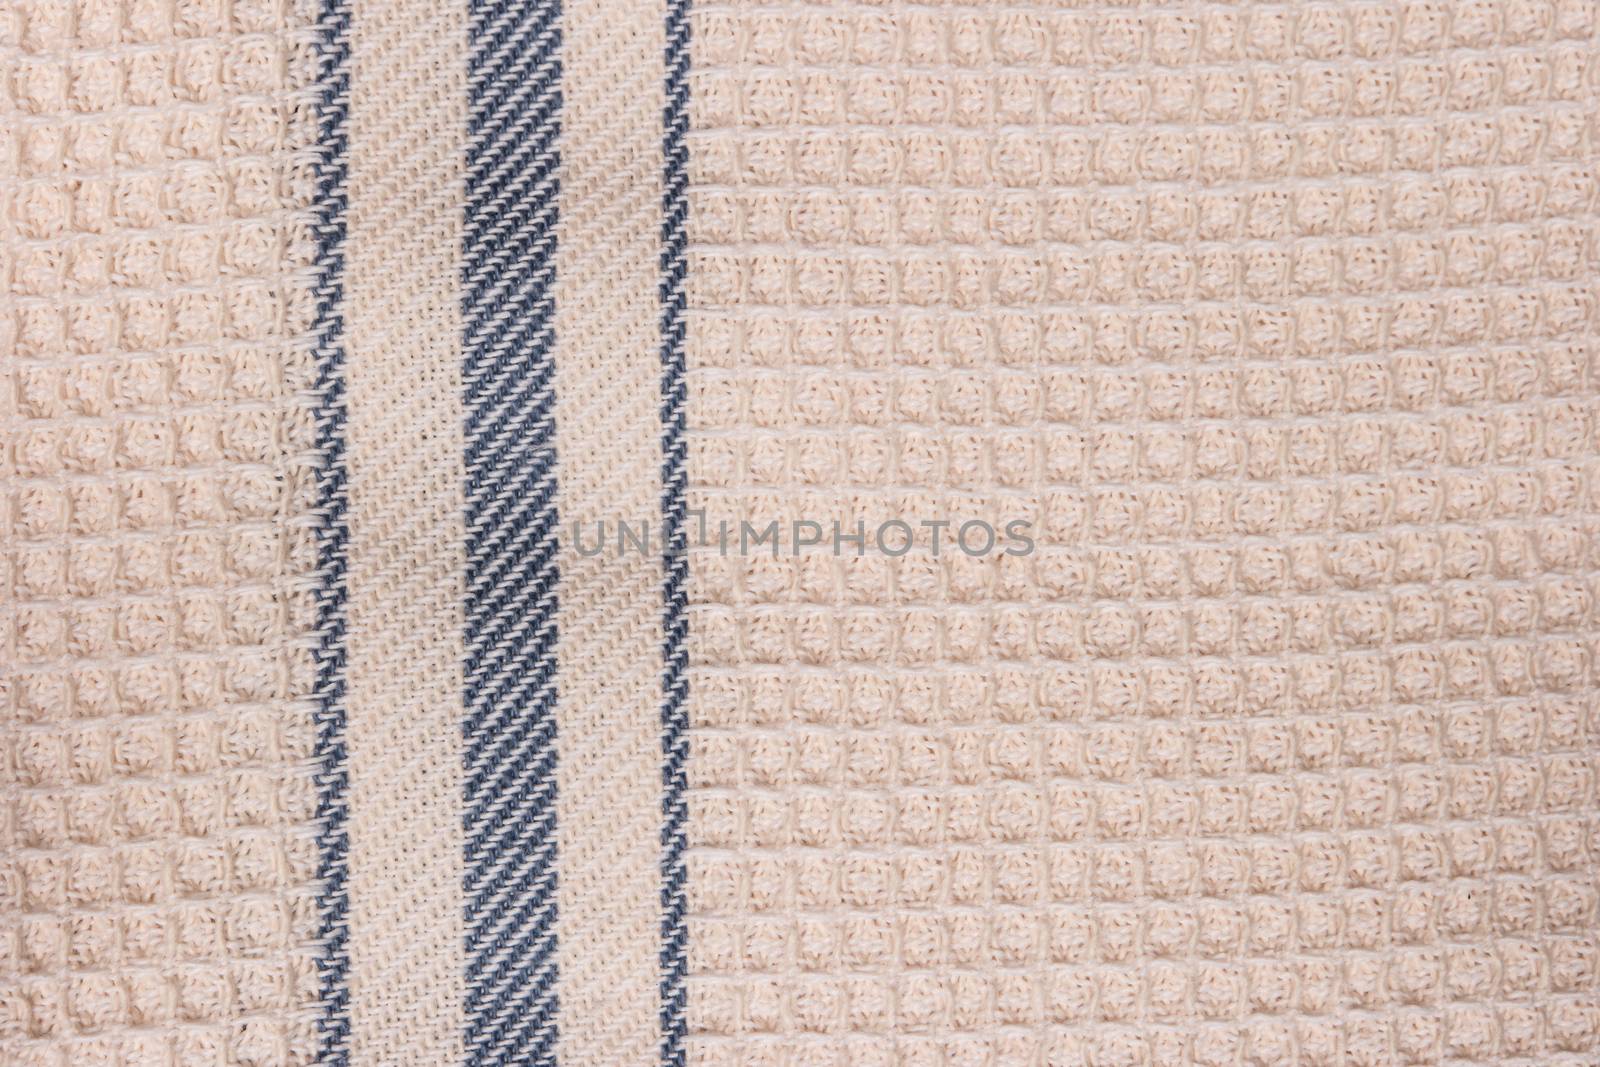 Blue and white striped towel fabric. Tablecloth texture. Cotton texture closeup, background